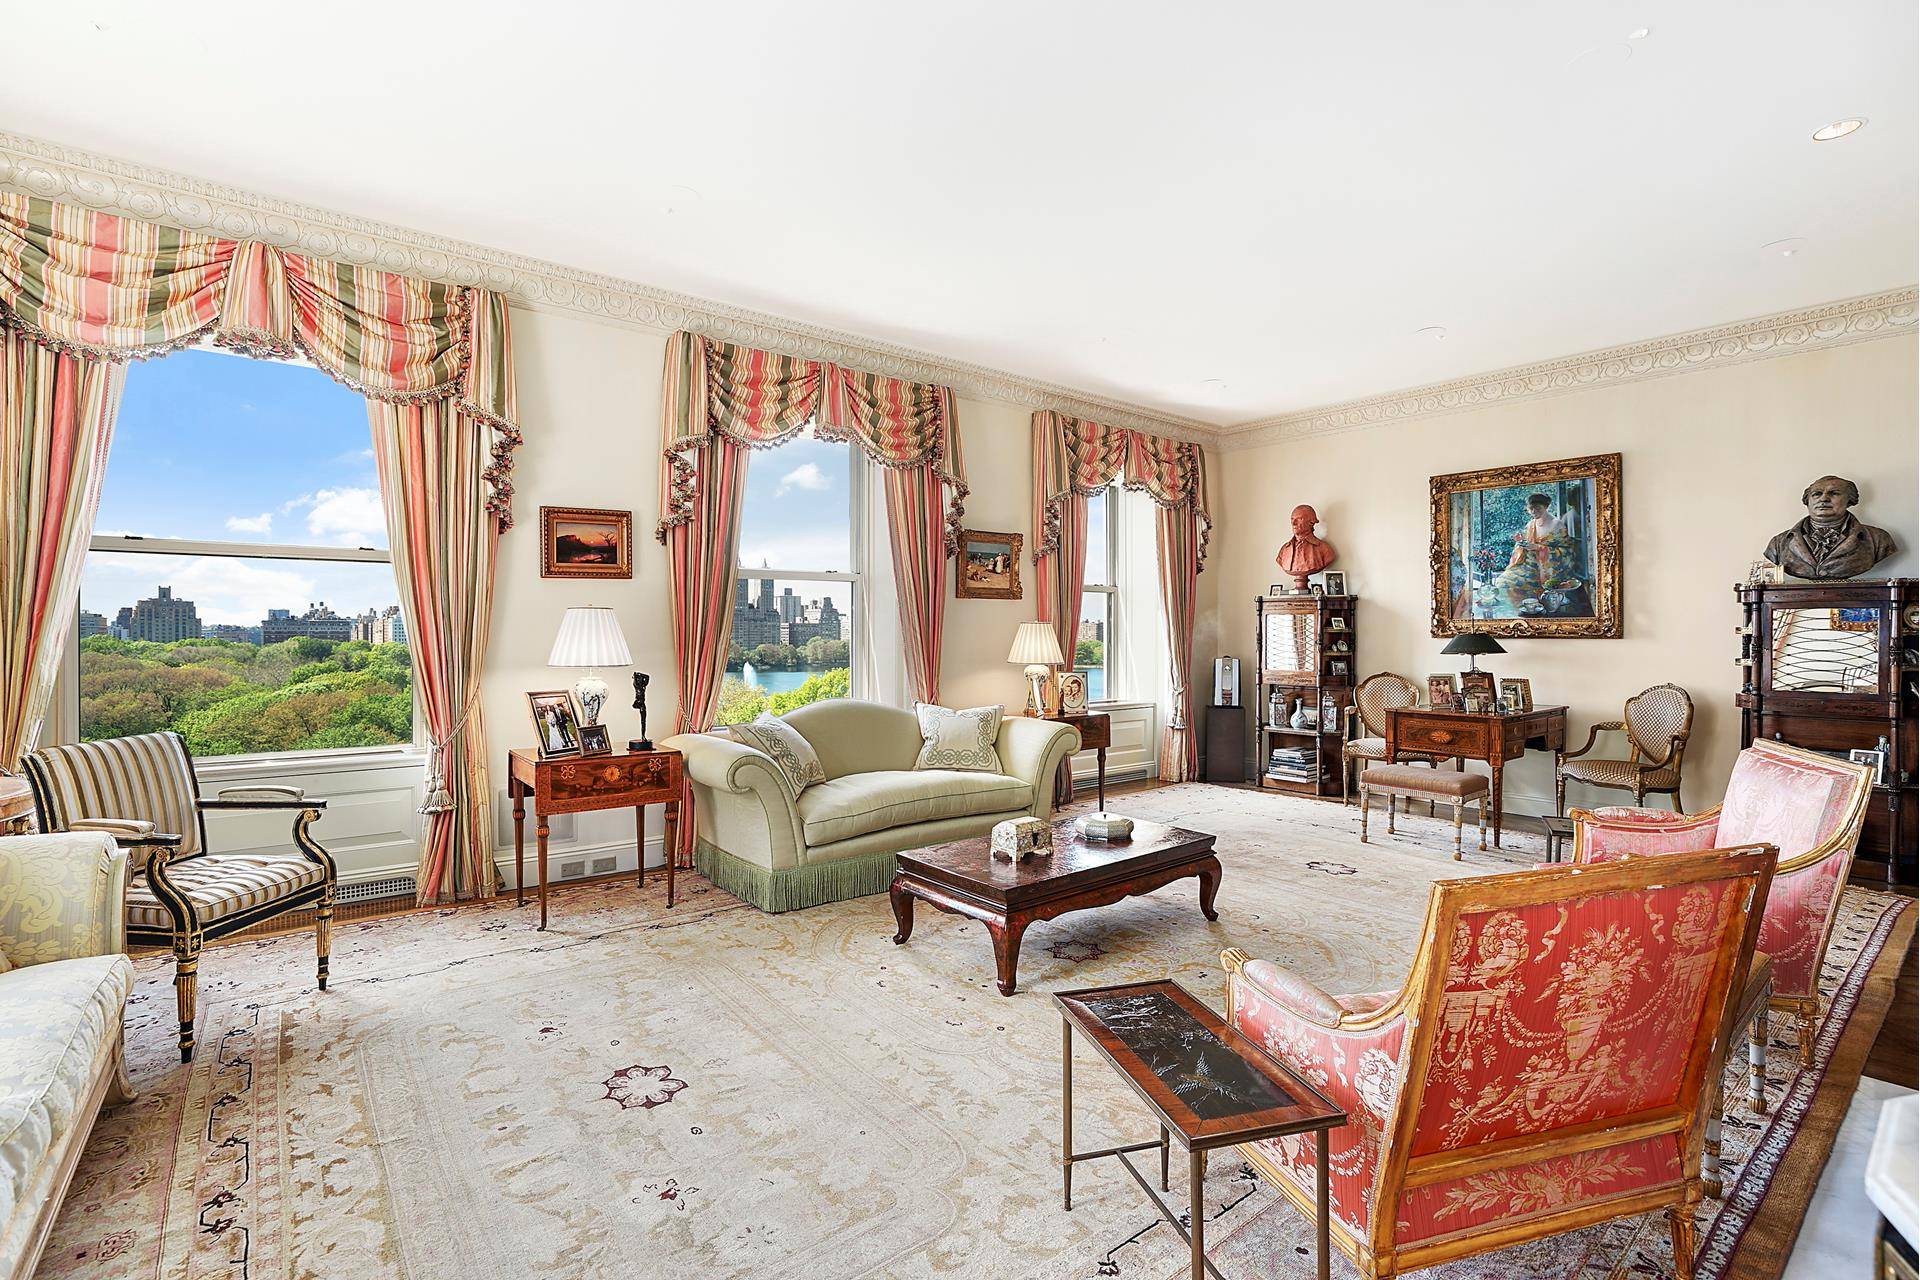 This exceptional 12 room home is located on a high floor in one of the most prestigious cooperatives on Fifth Avenue.